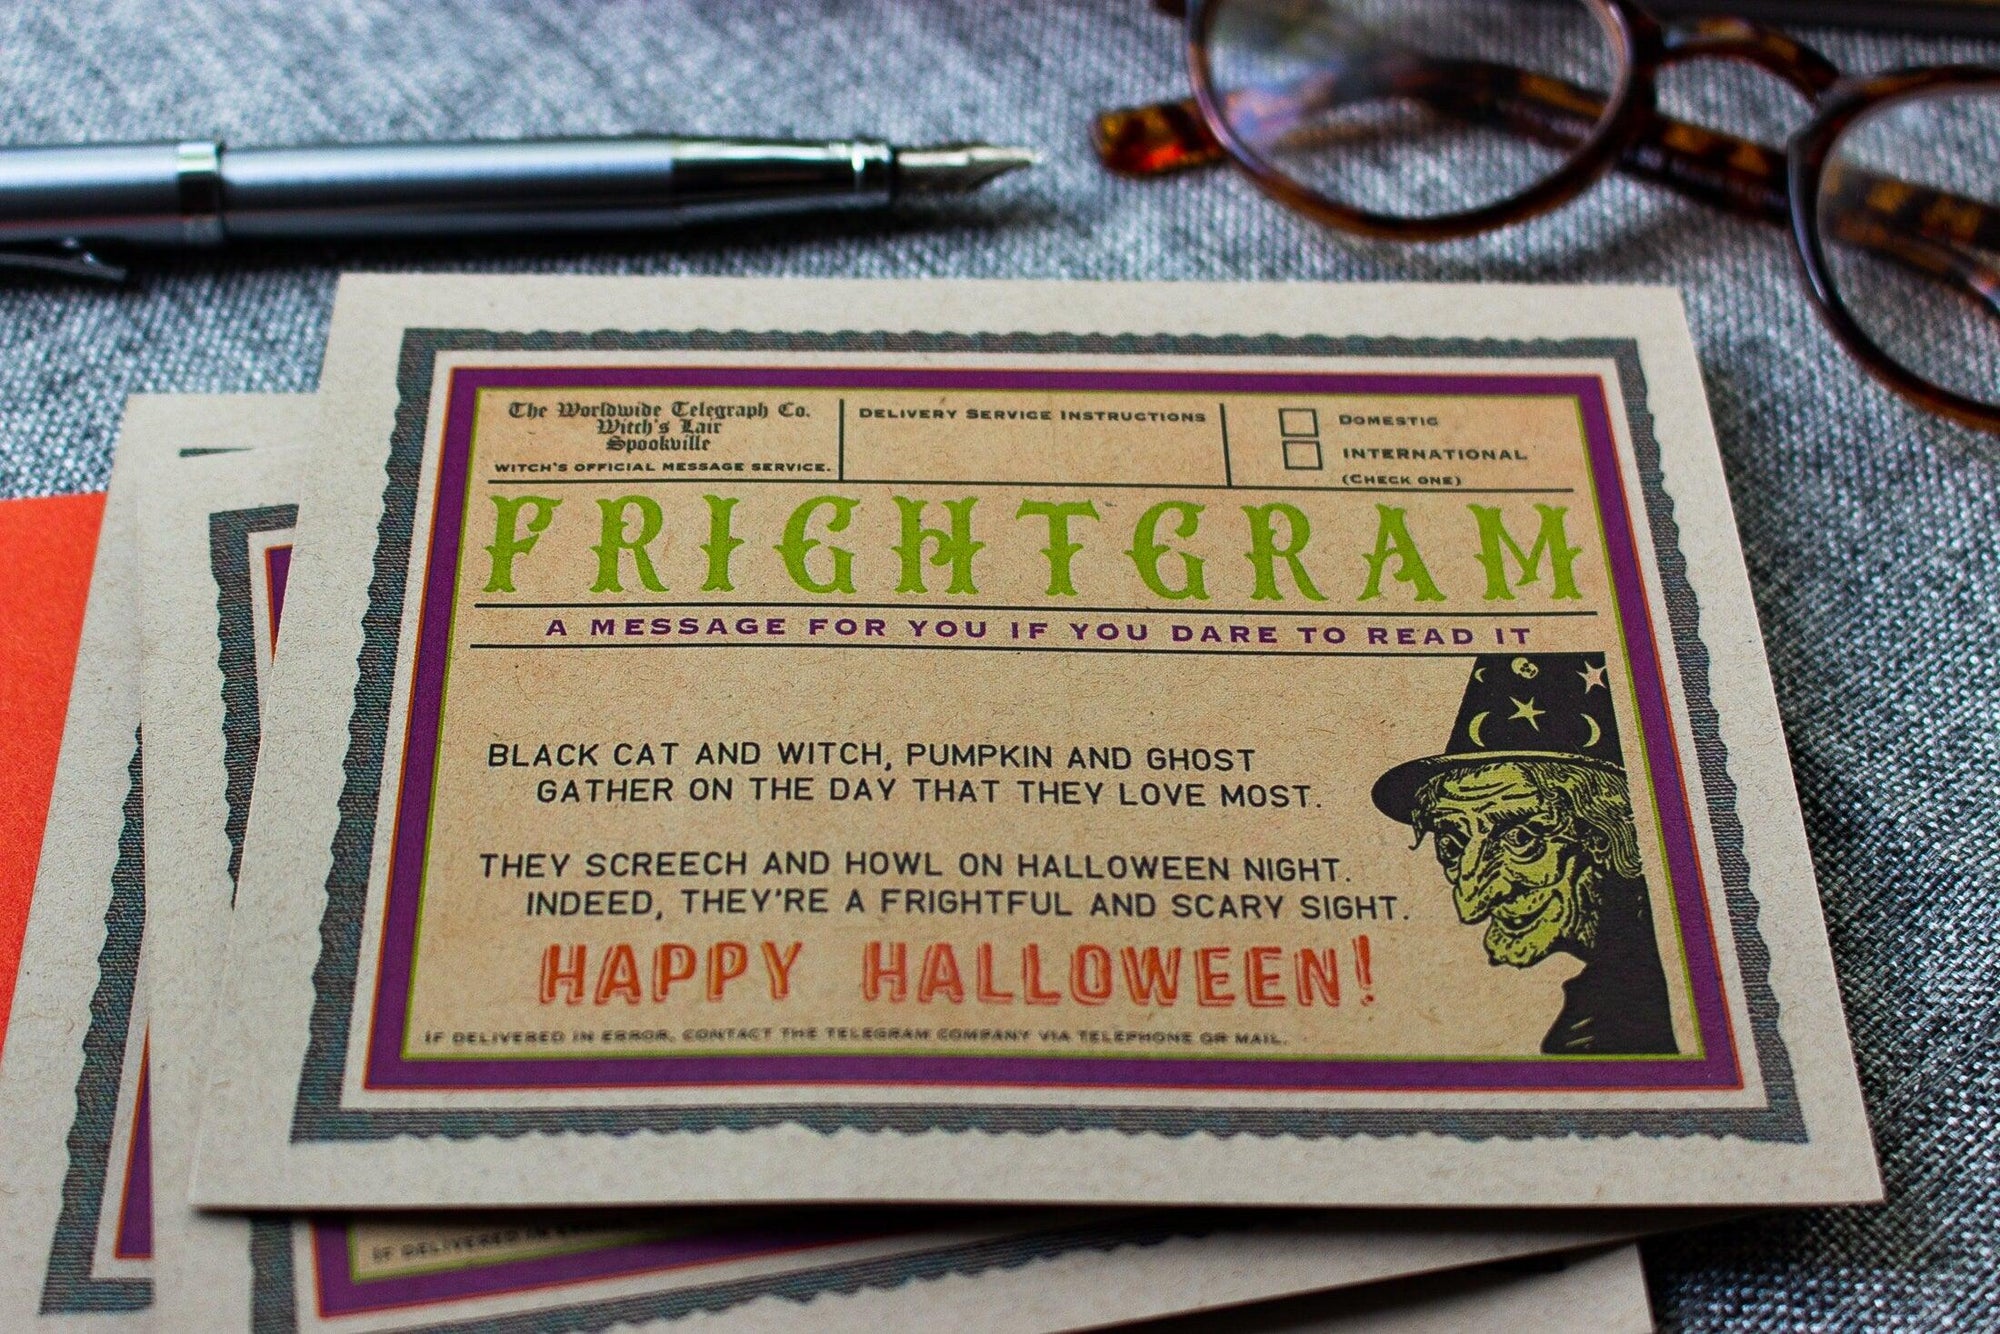 Scary Witch Halloween Card - Halloween Frightgram - Happy Halloween - Nostalgic Halloween Card